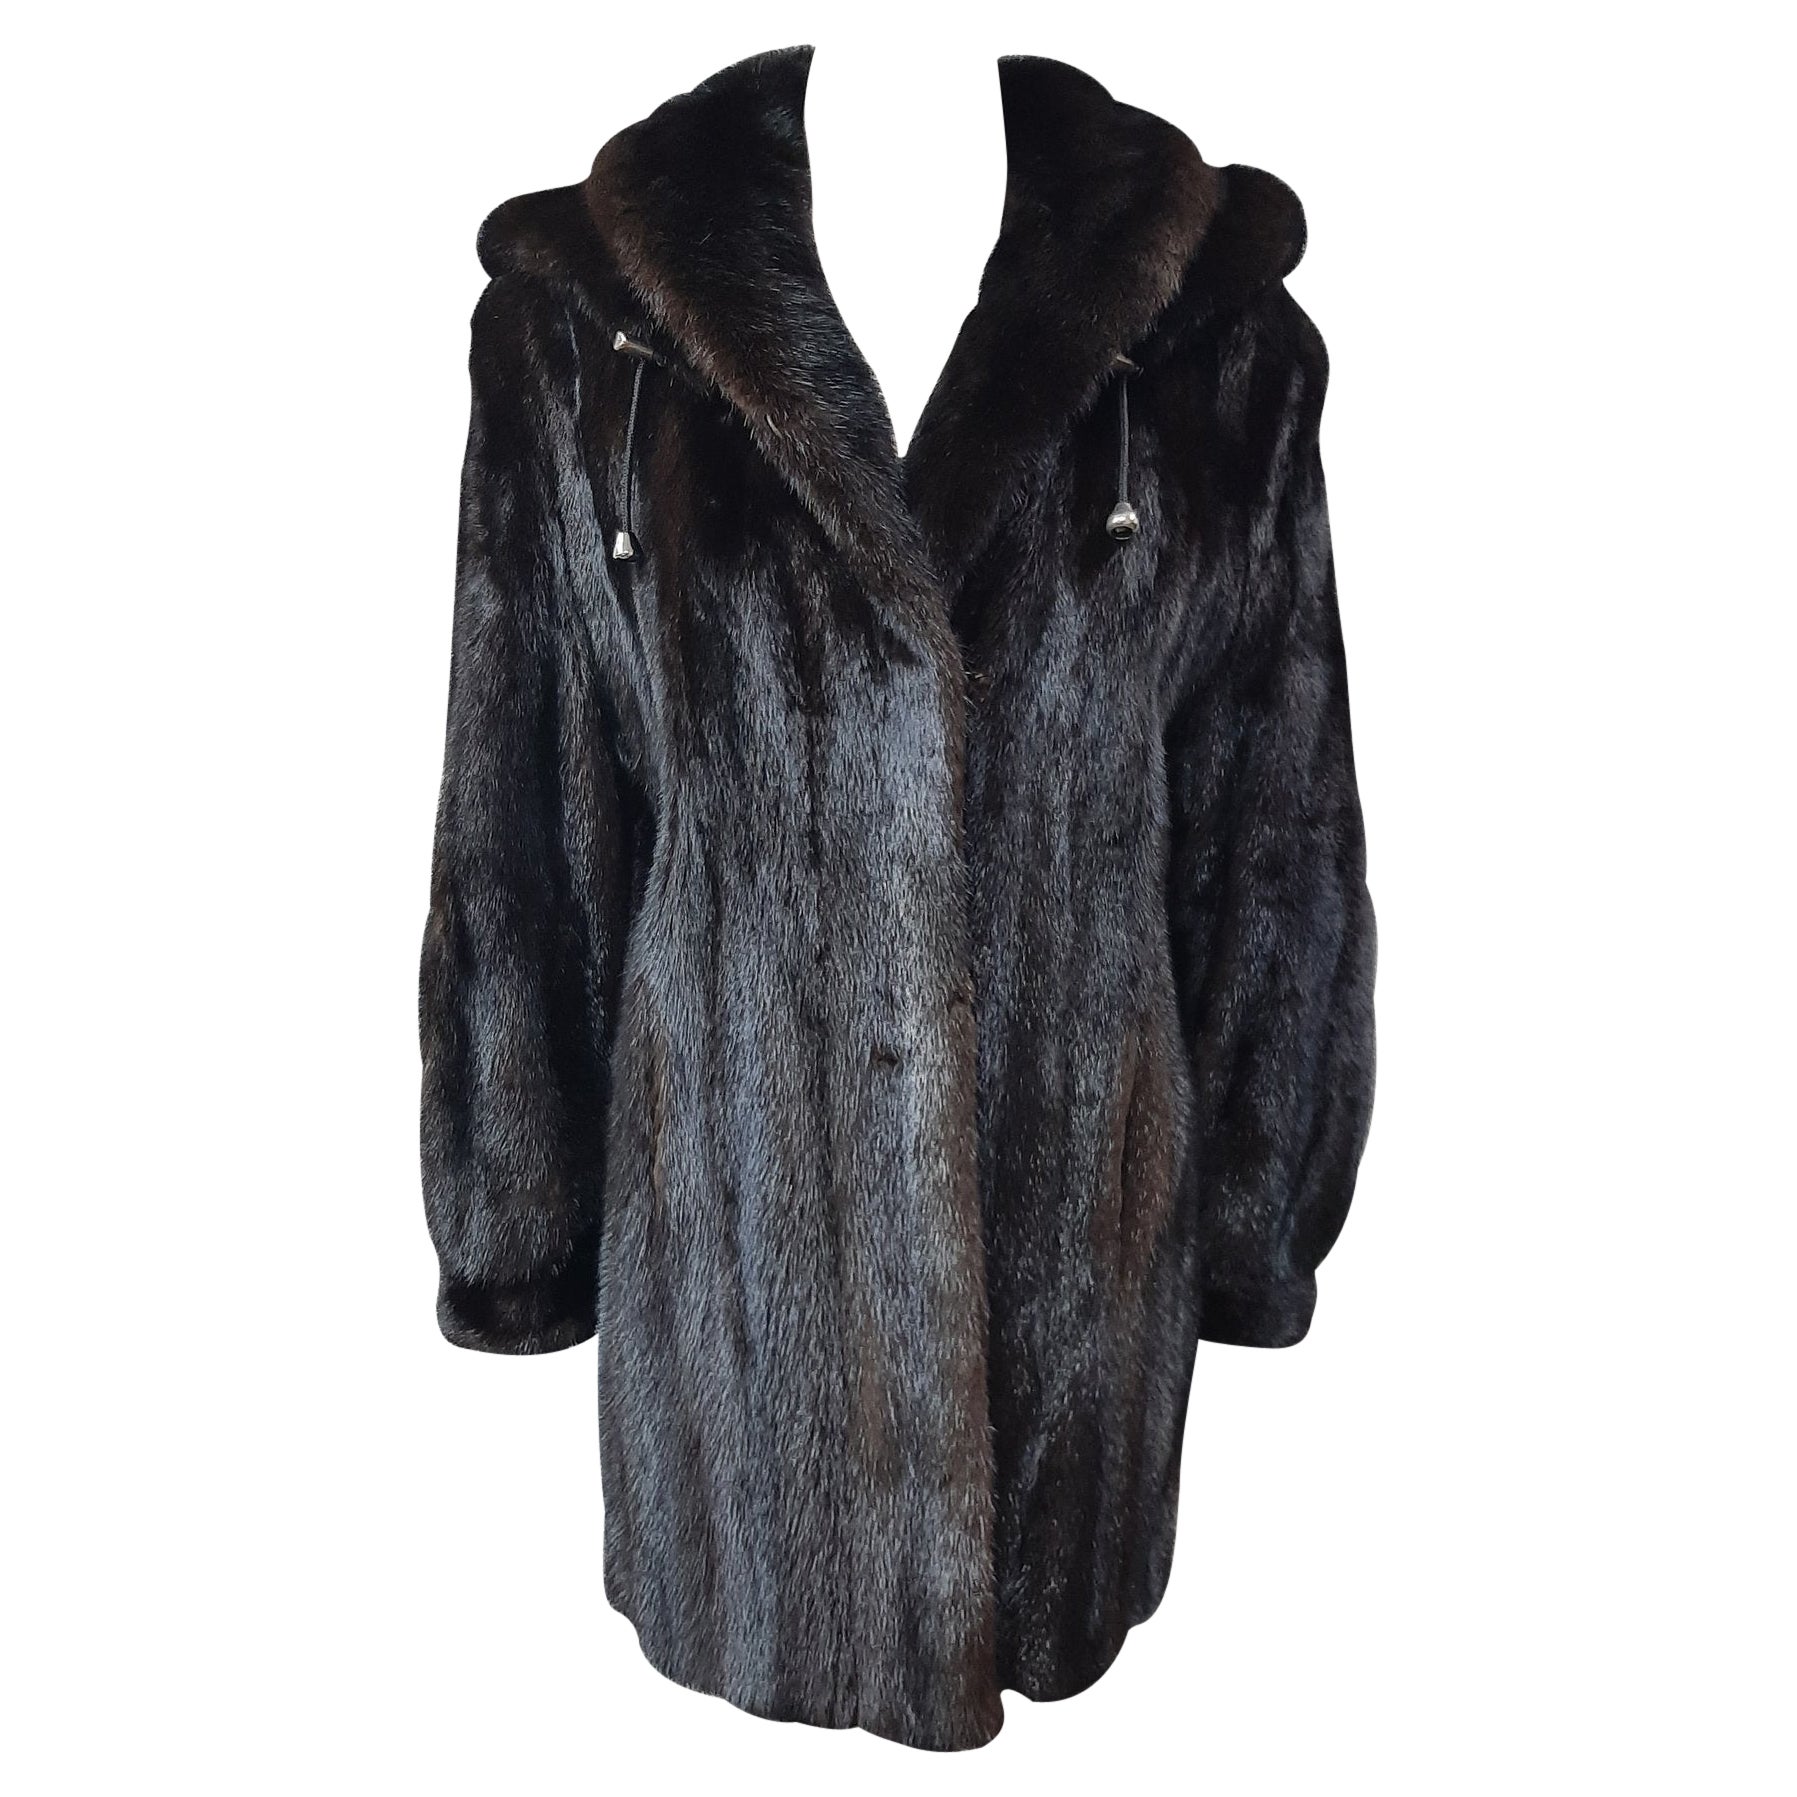 Unused mink fur coat with a hood size 12 For Sale